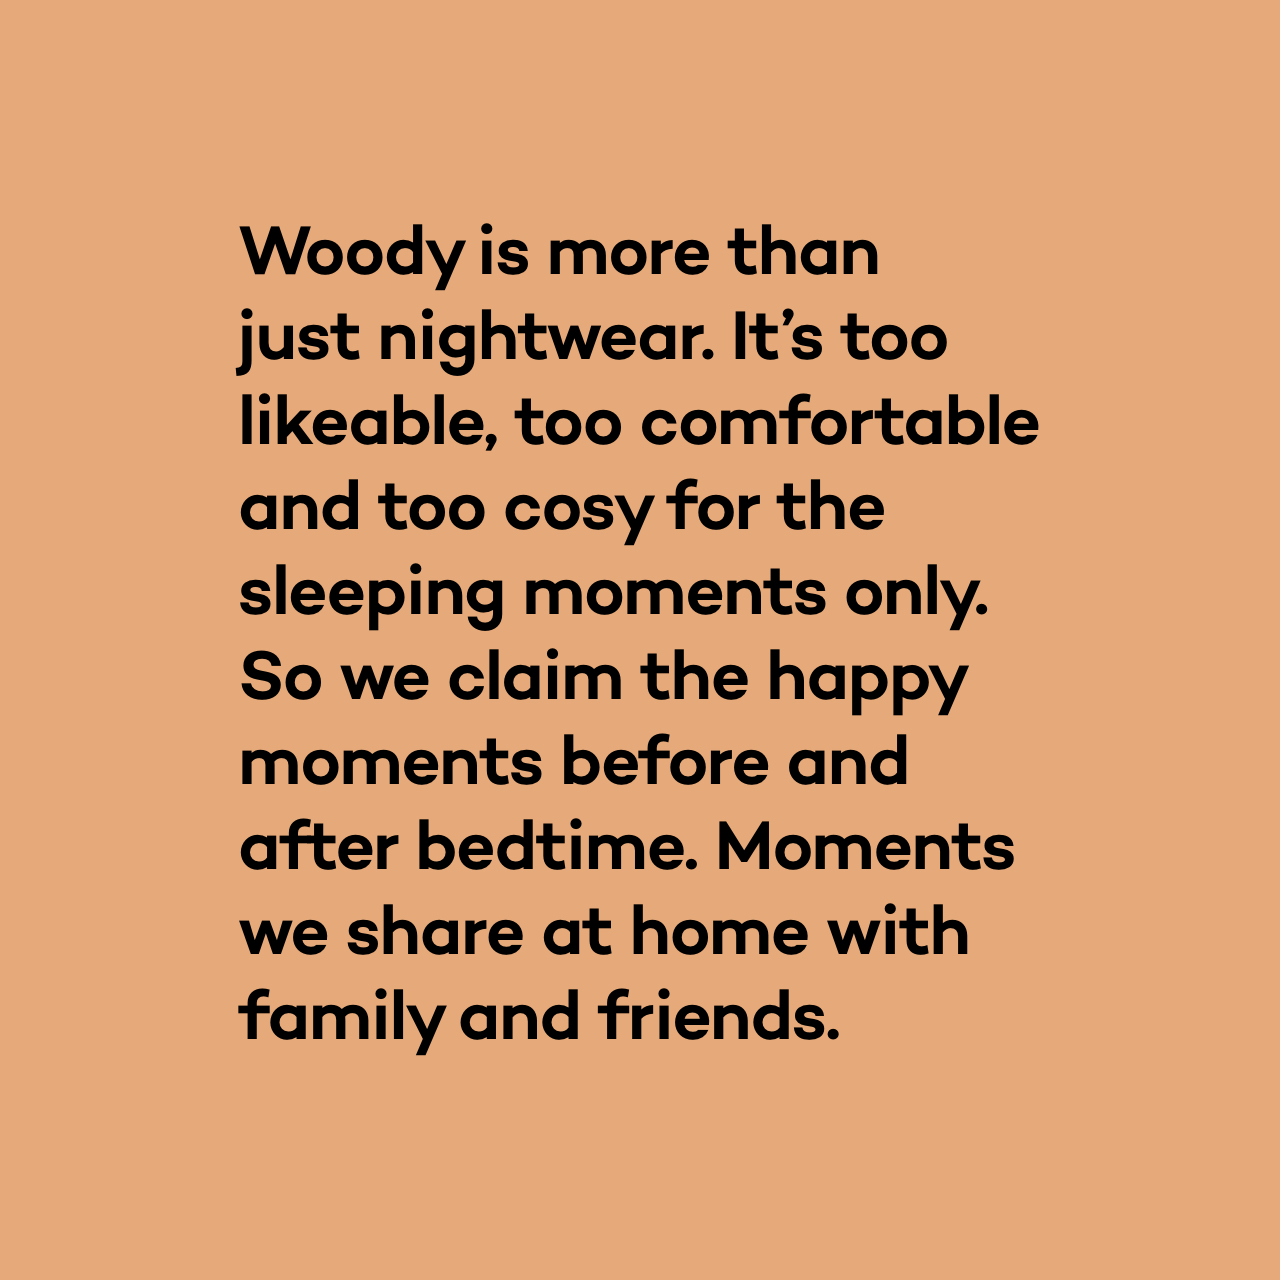 concept creatie en brand story: Woody is more than just nightwear. It's too likeable, too comfortable and too cosy for the sleeping moments only